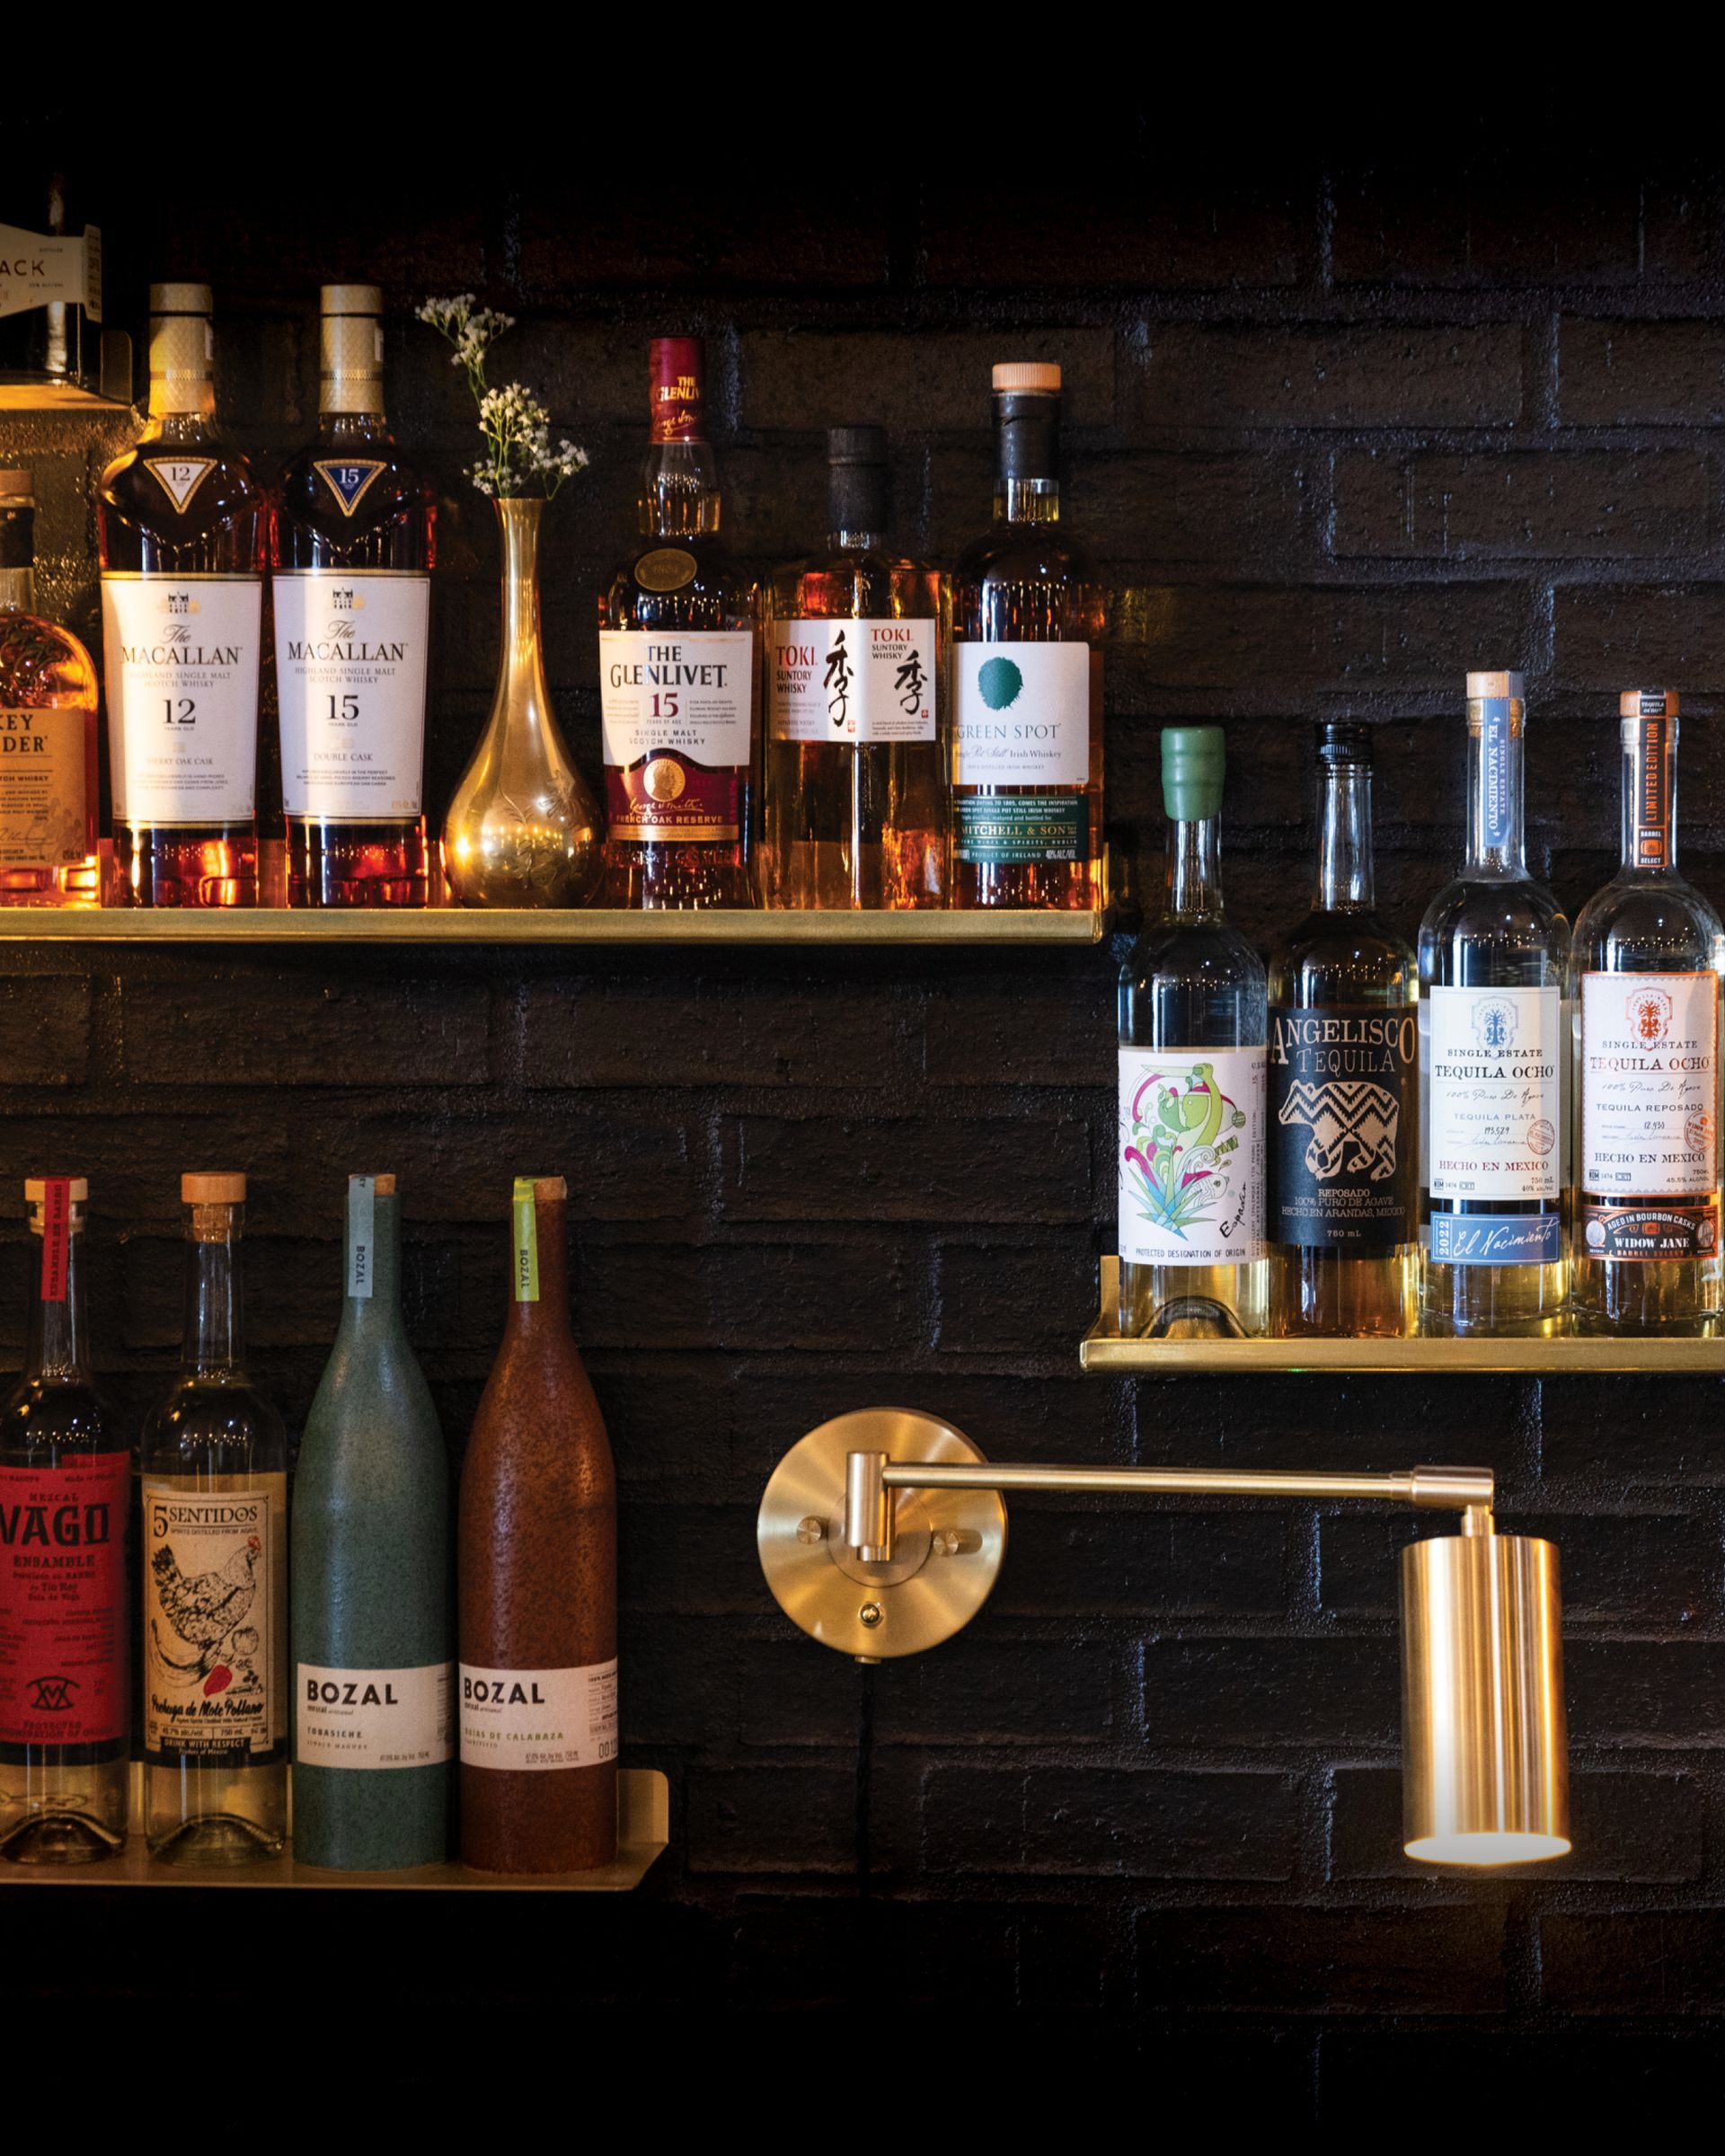 Several bottles of alcohol are on a shelf including a bottle of glenfiddich